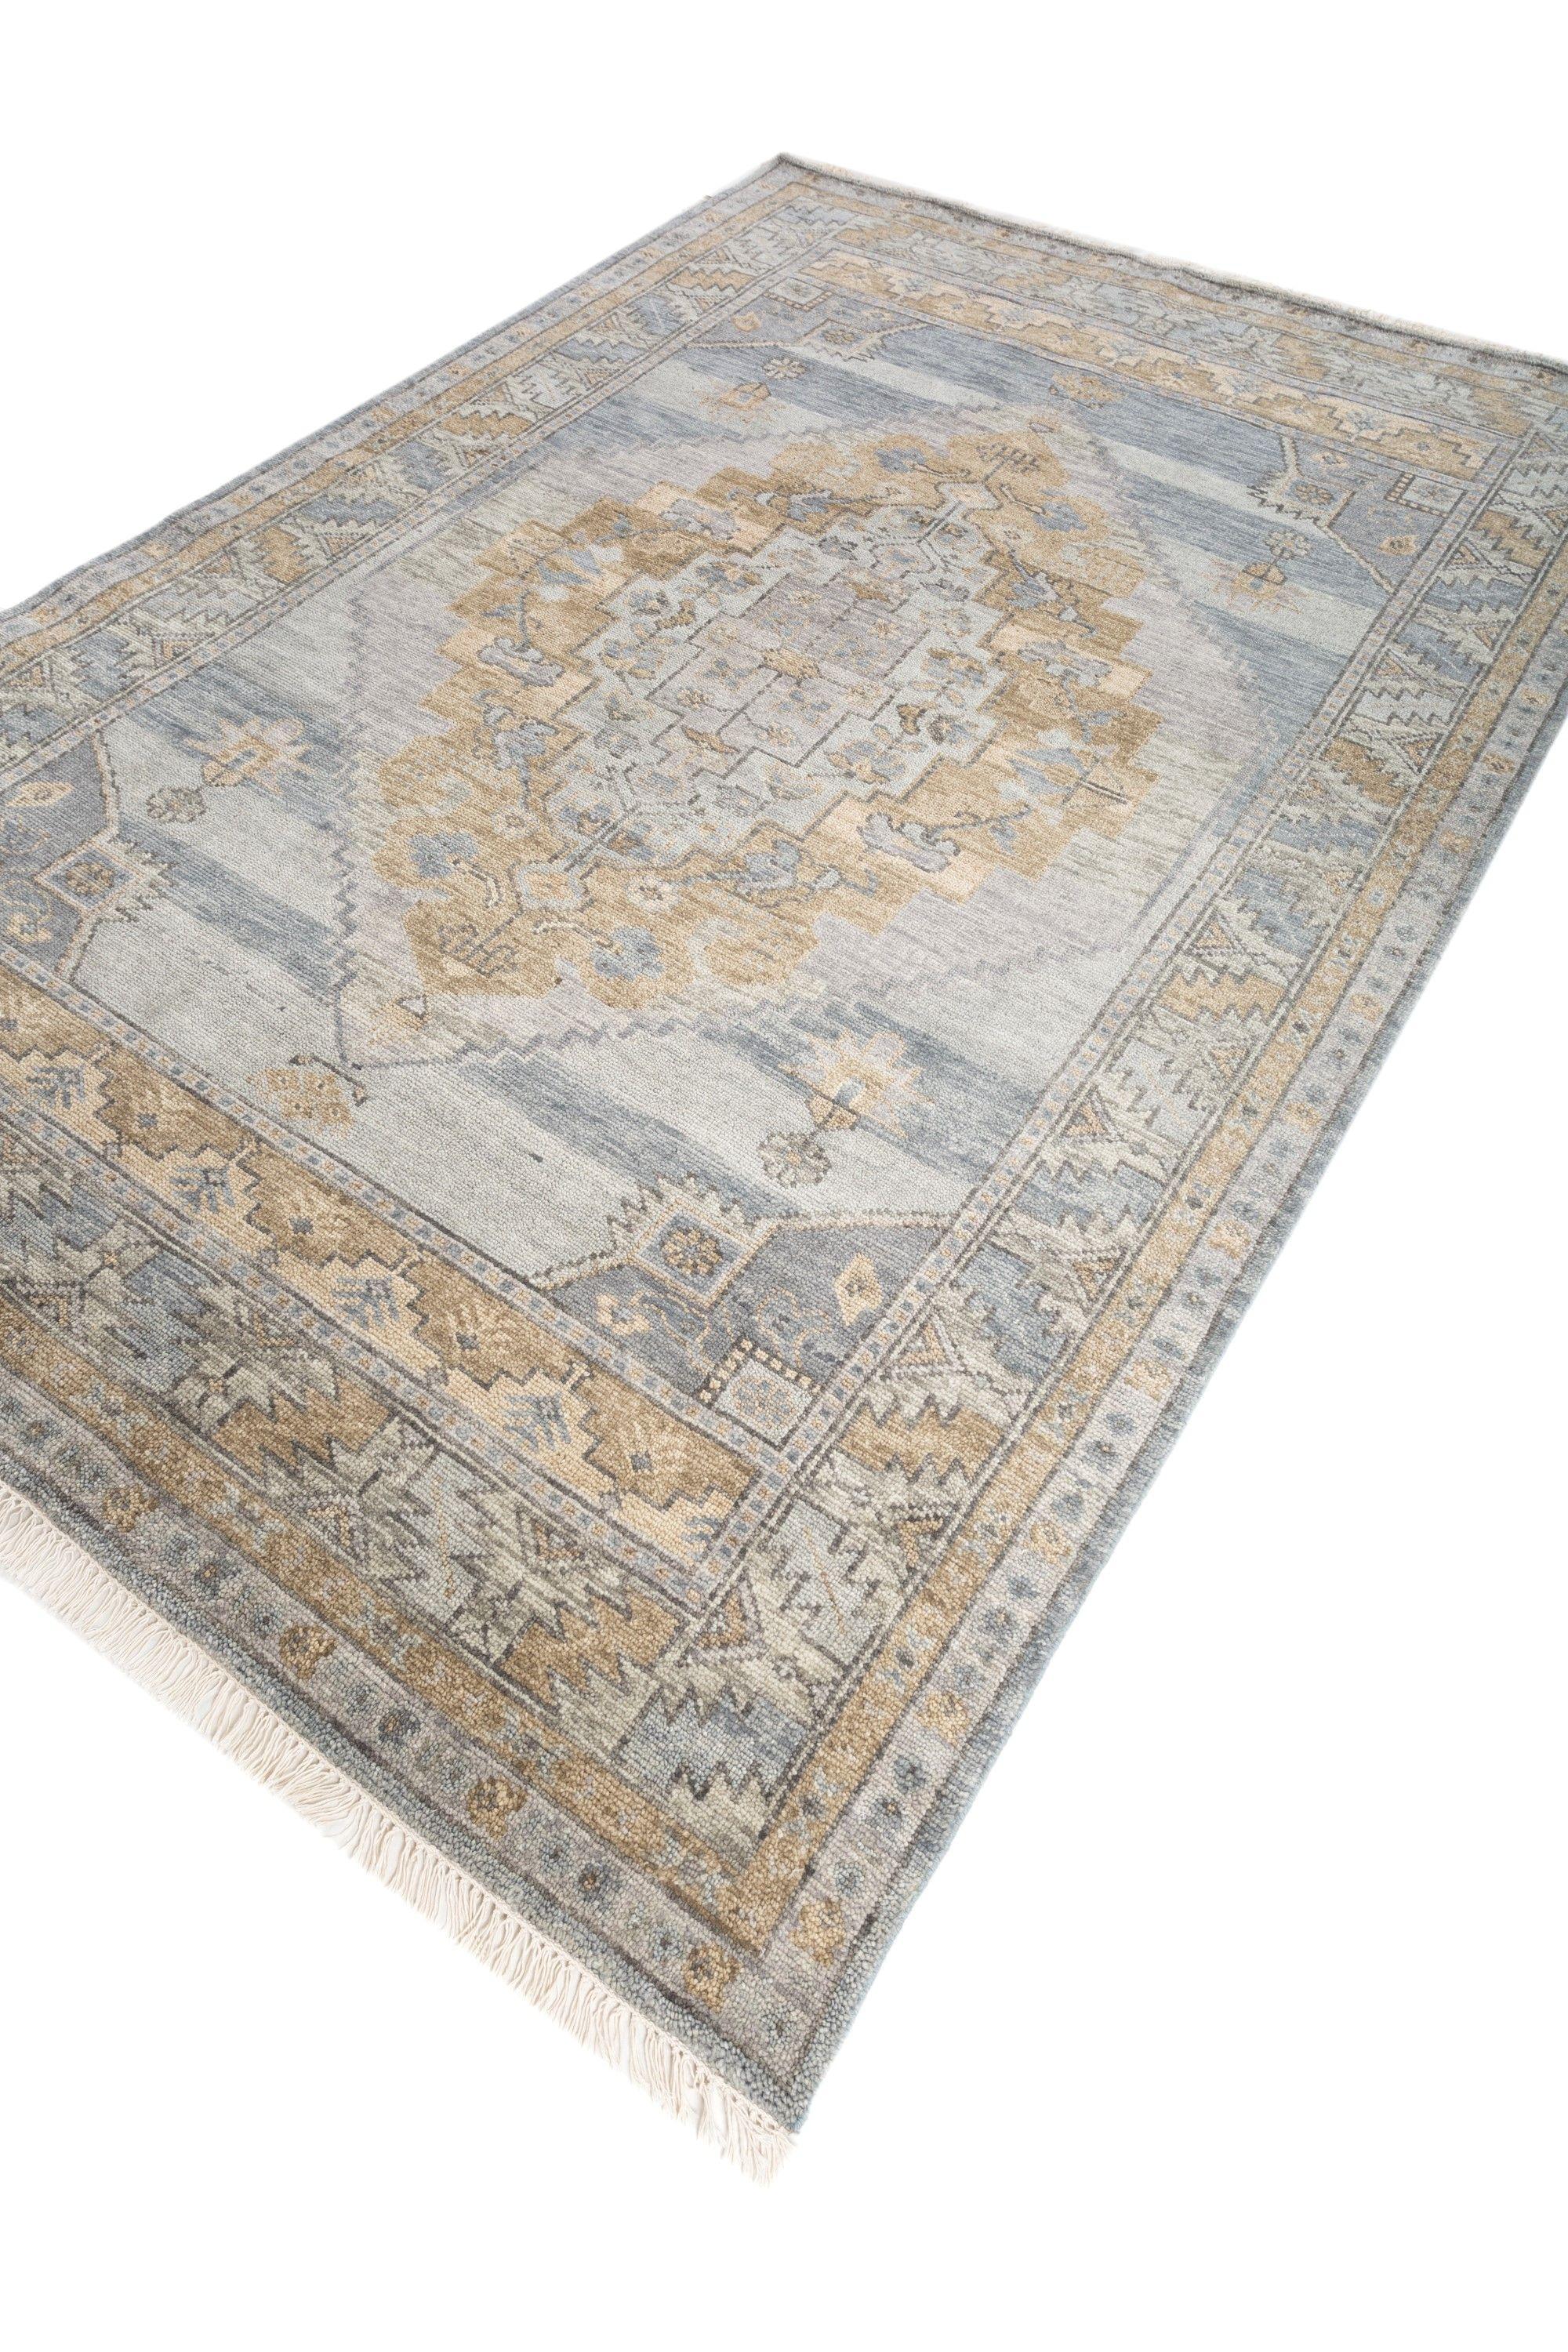 Tribal Infinity Veil Nickel 180X270 cm Hand-Knotted Rug For Sale